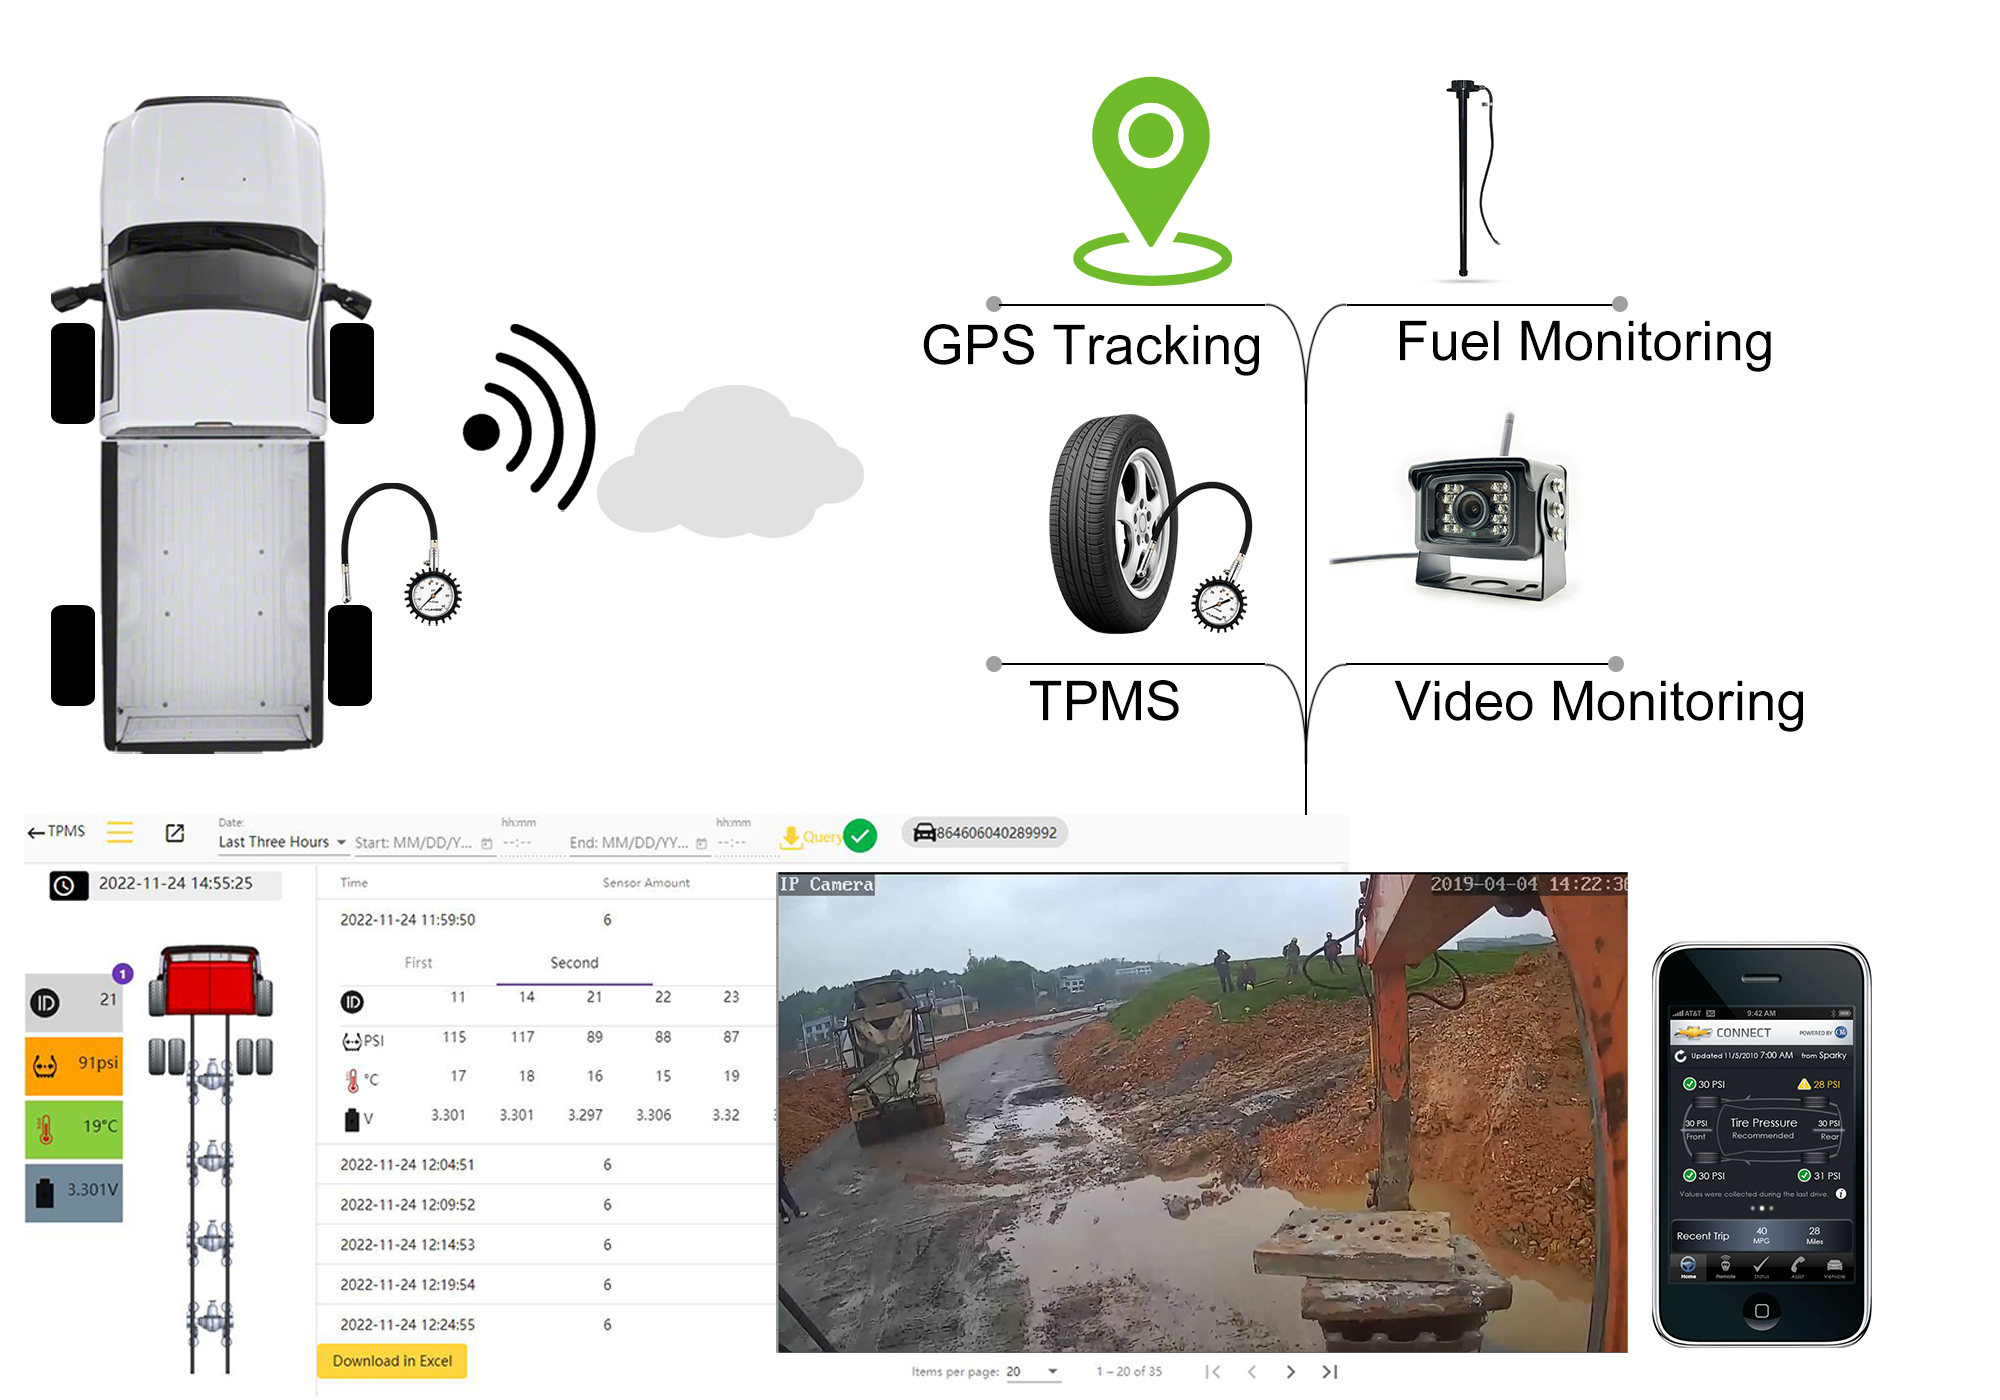 complte solution for gps tracking, fuel level monitoring, tire pressure monitoring and video monitoring all in one set